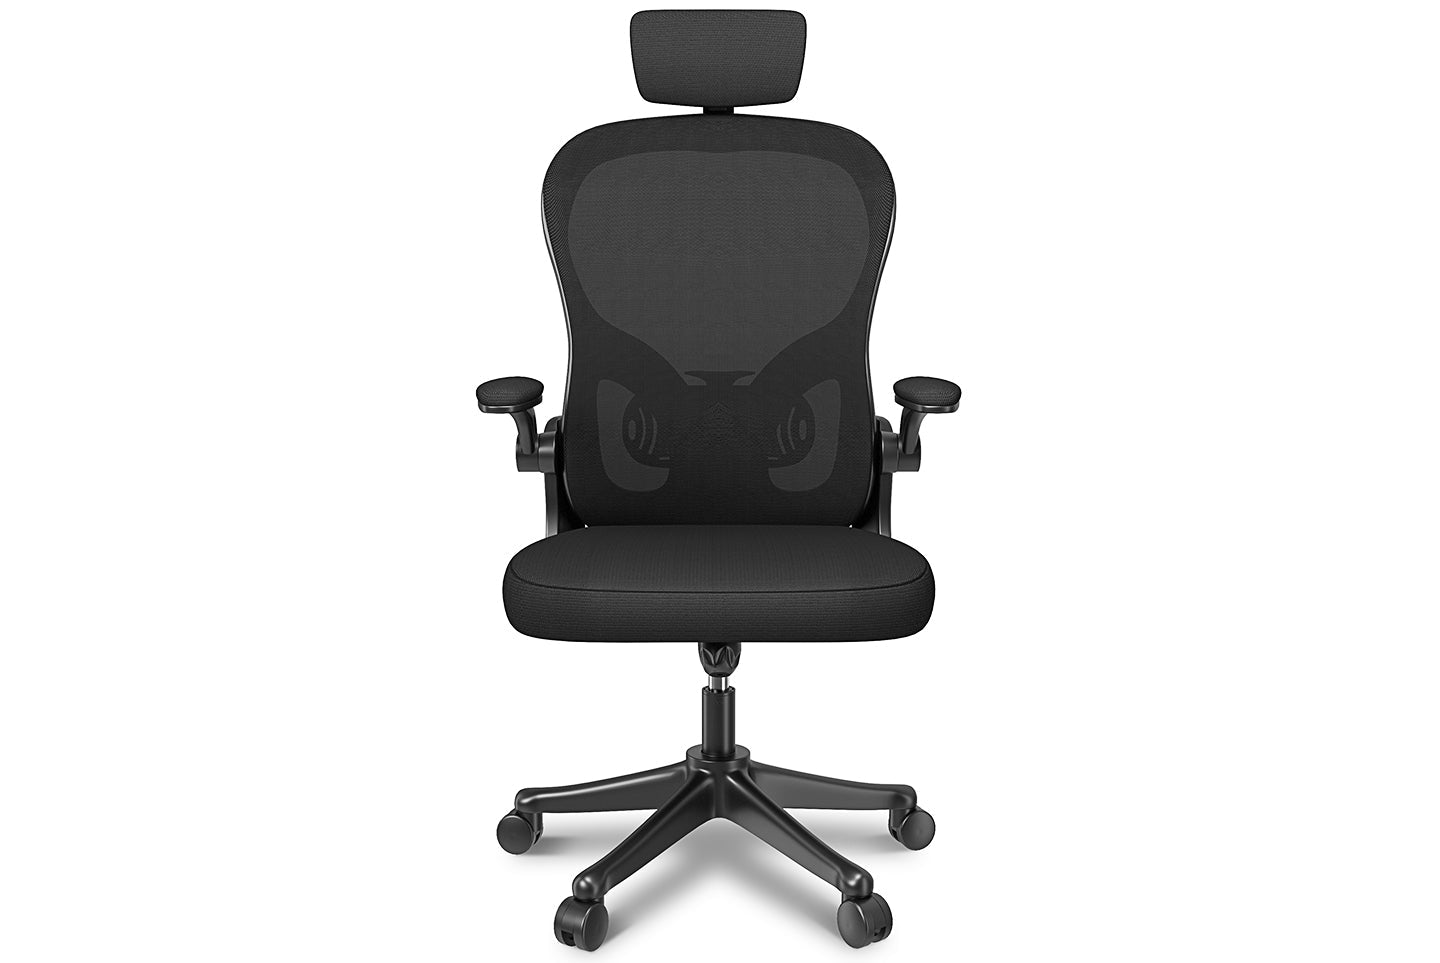 Office Chair Ergonomic Desk Chair, Executive Swivel Computer Chair with Padded Seat Cushion for Home/Office, Max Load 150kg